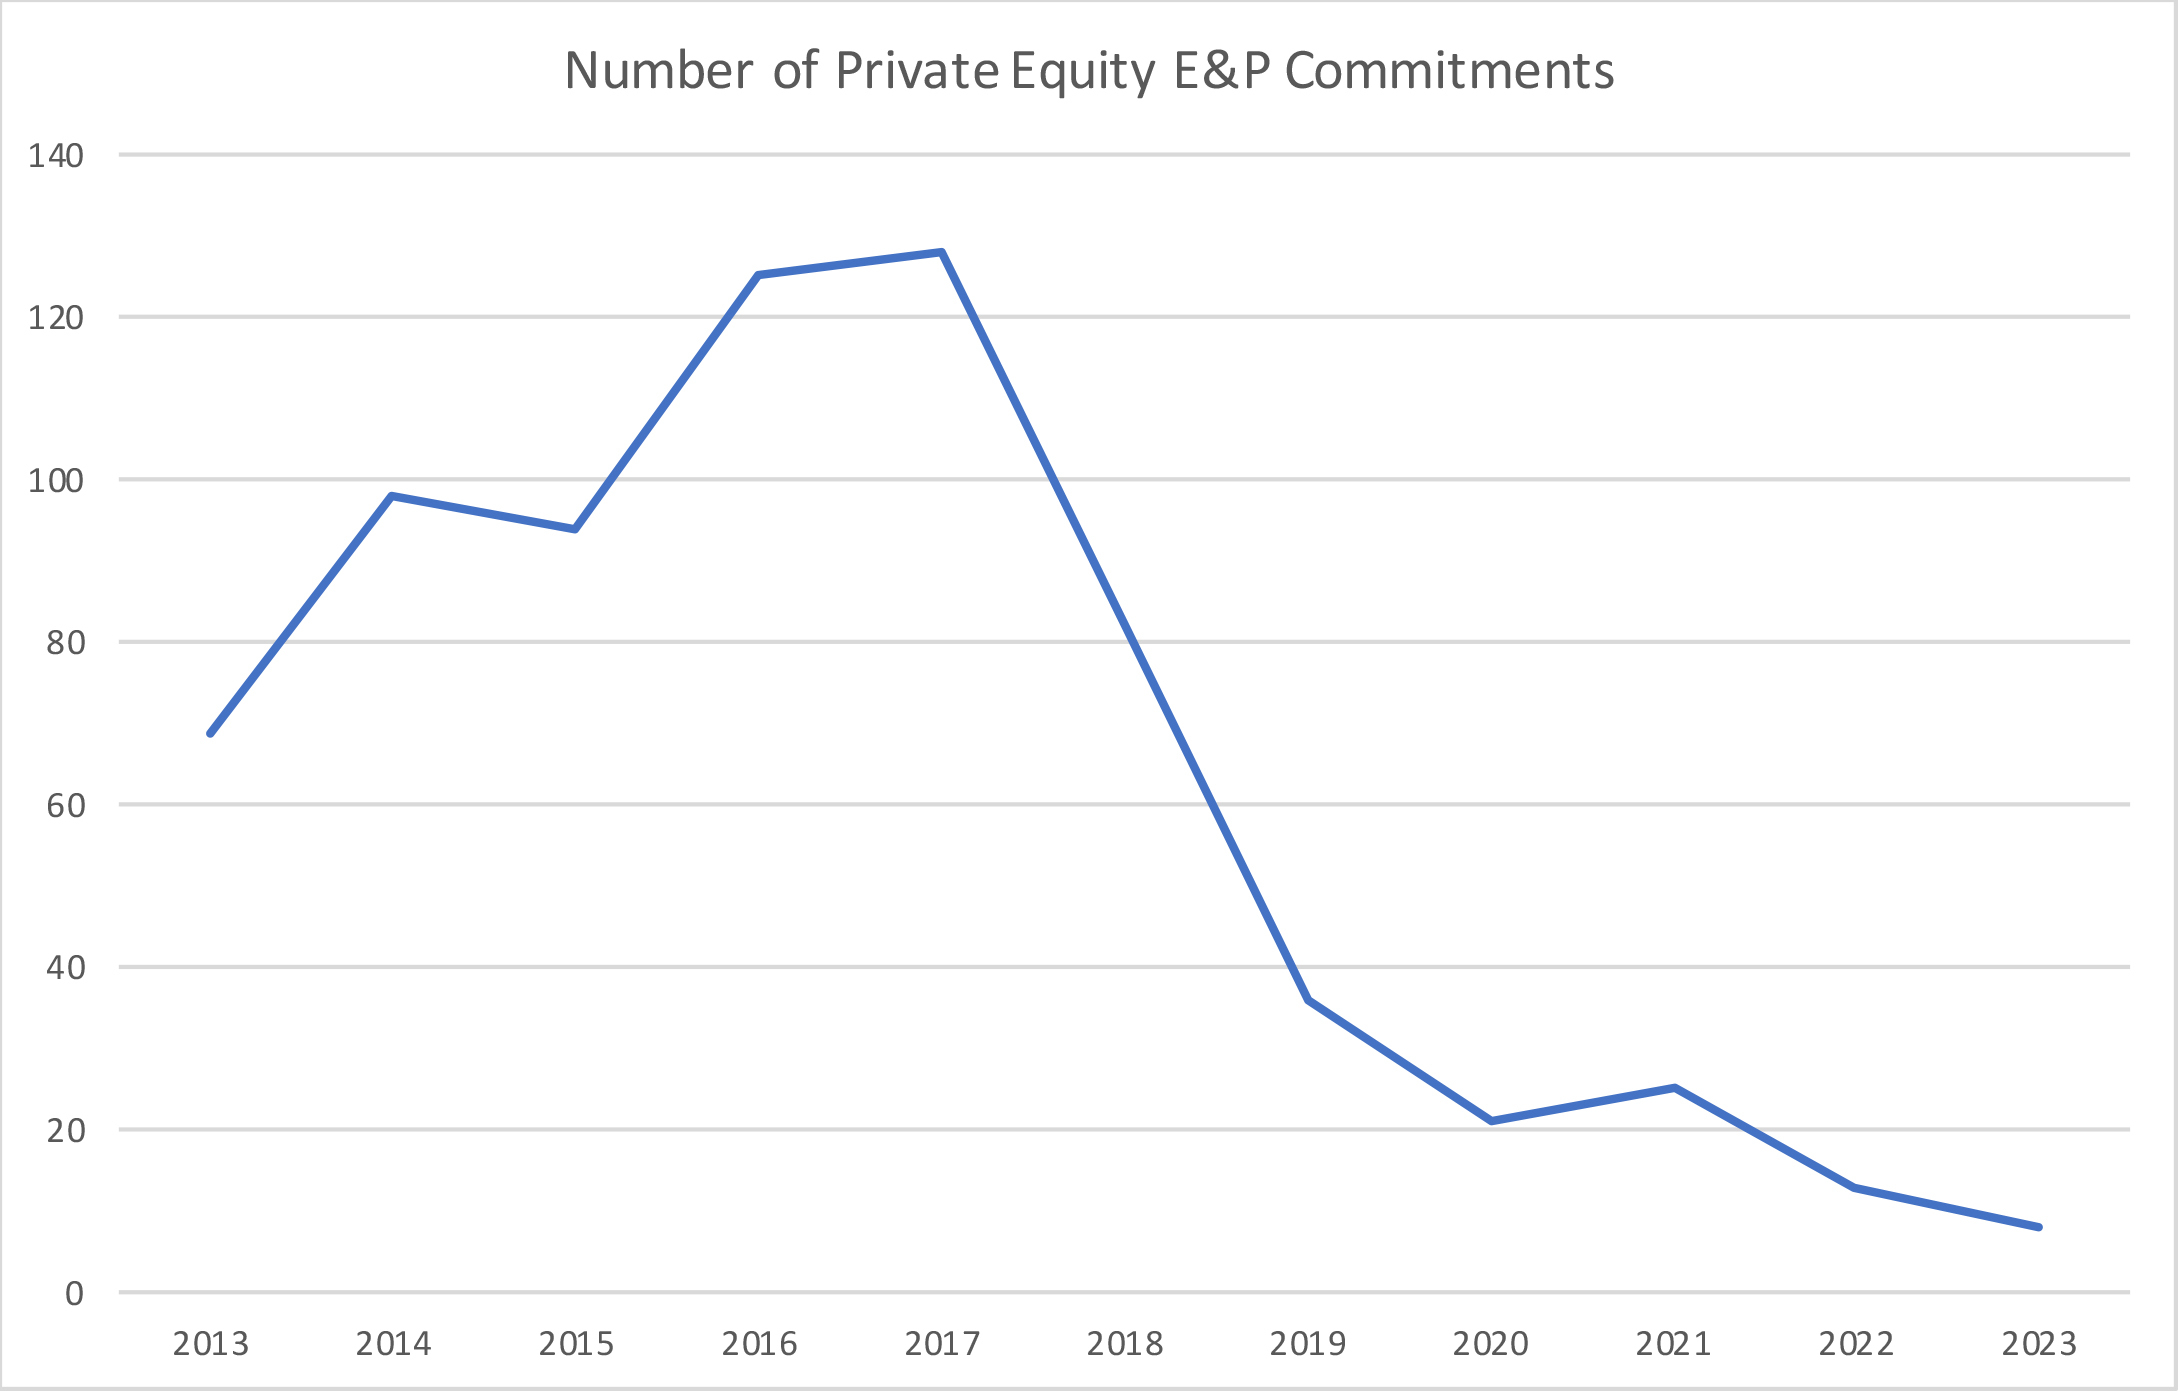 Private Equity E&P Committments